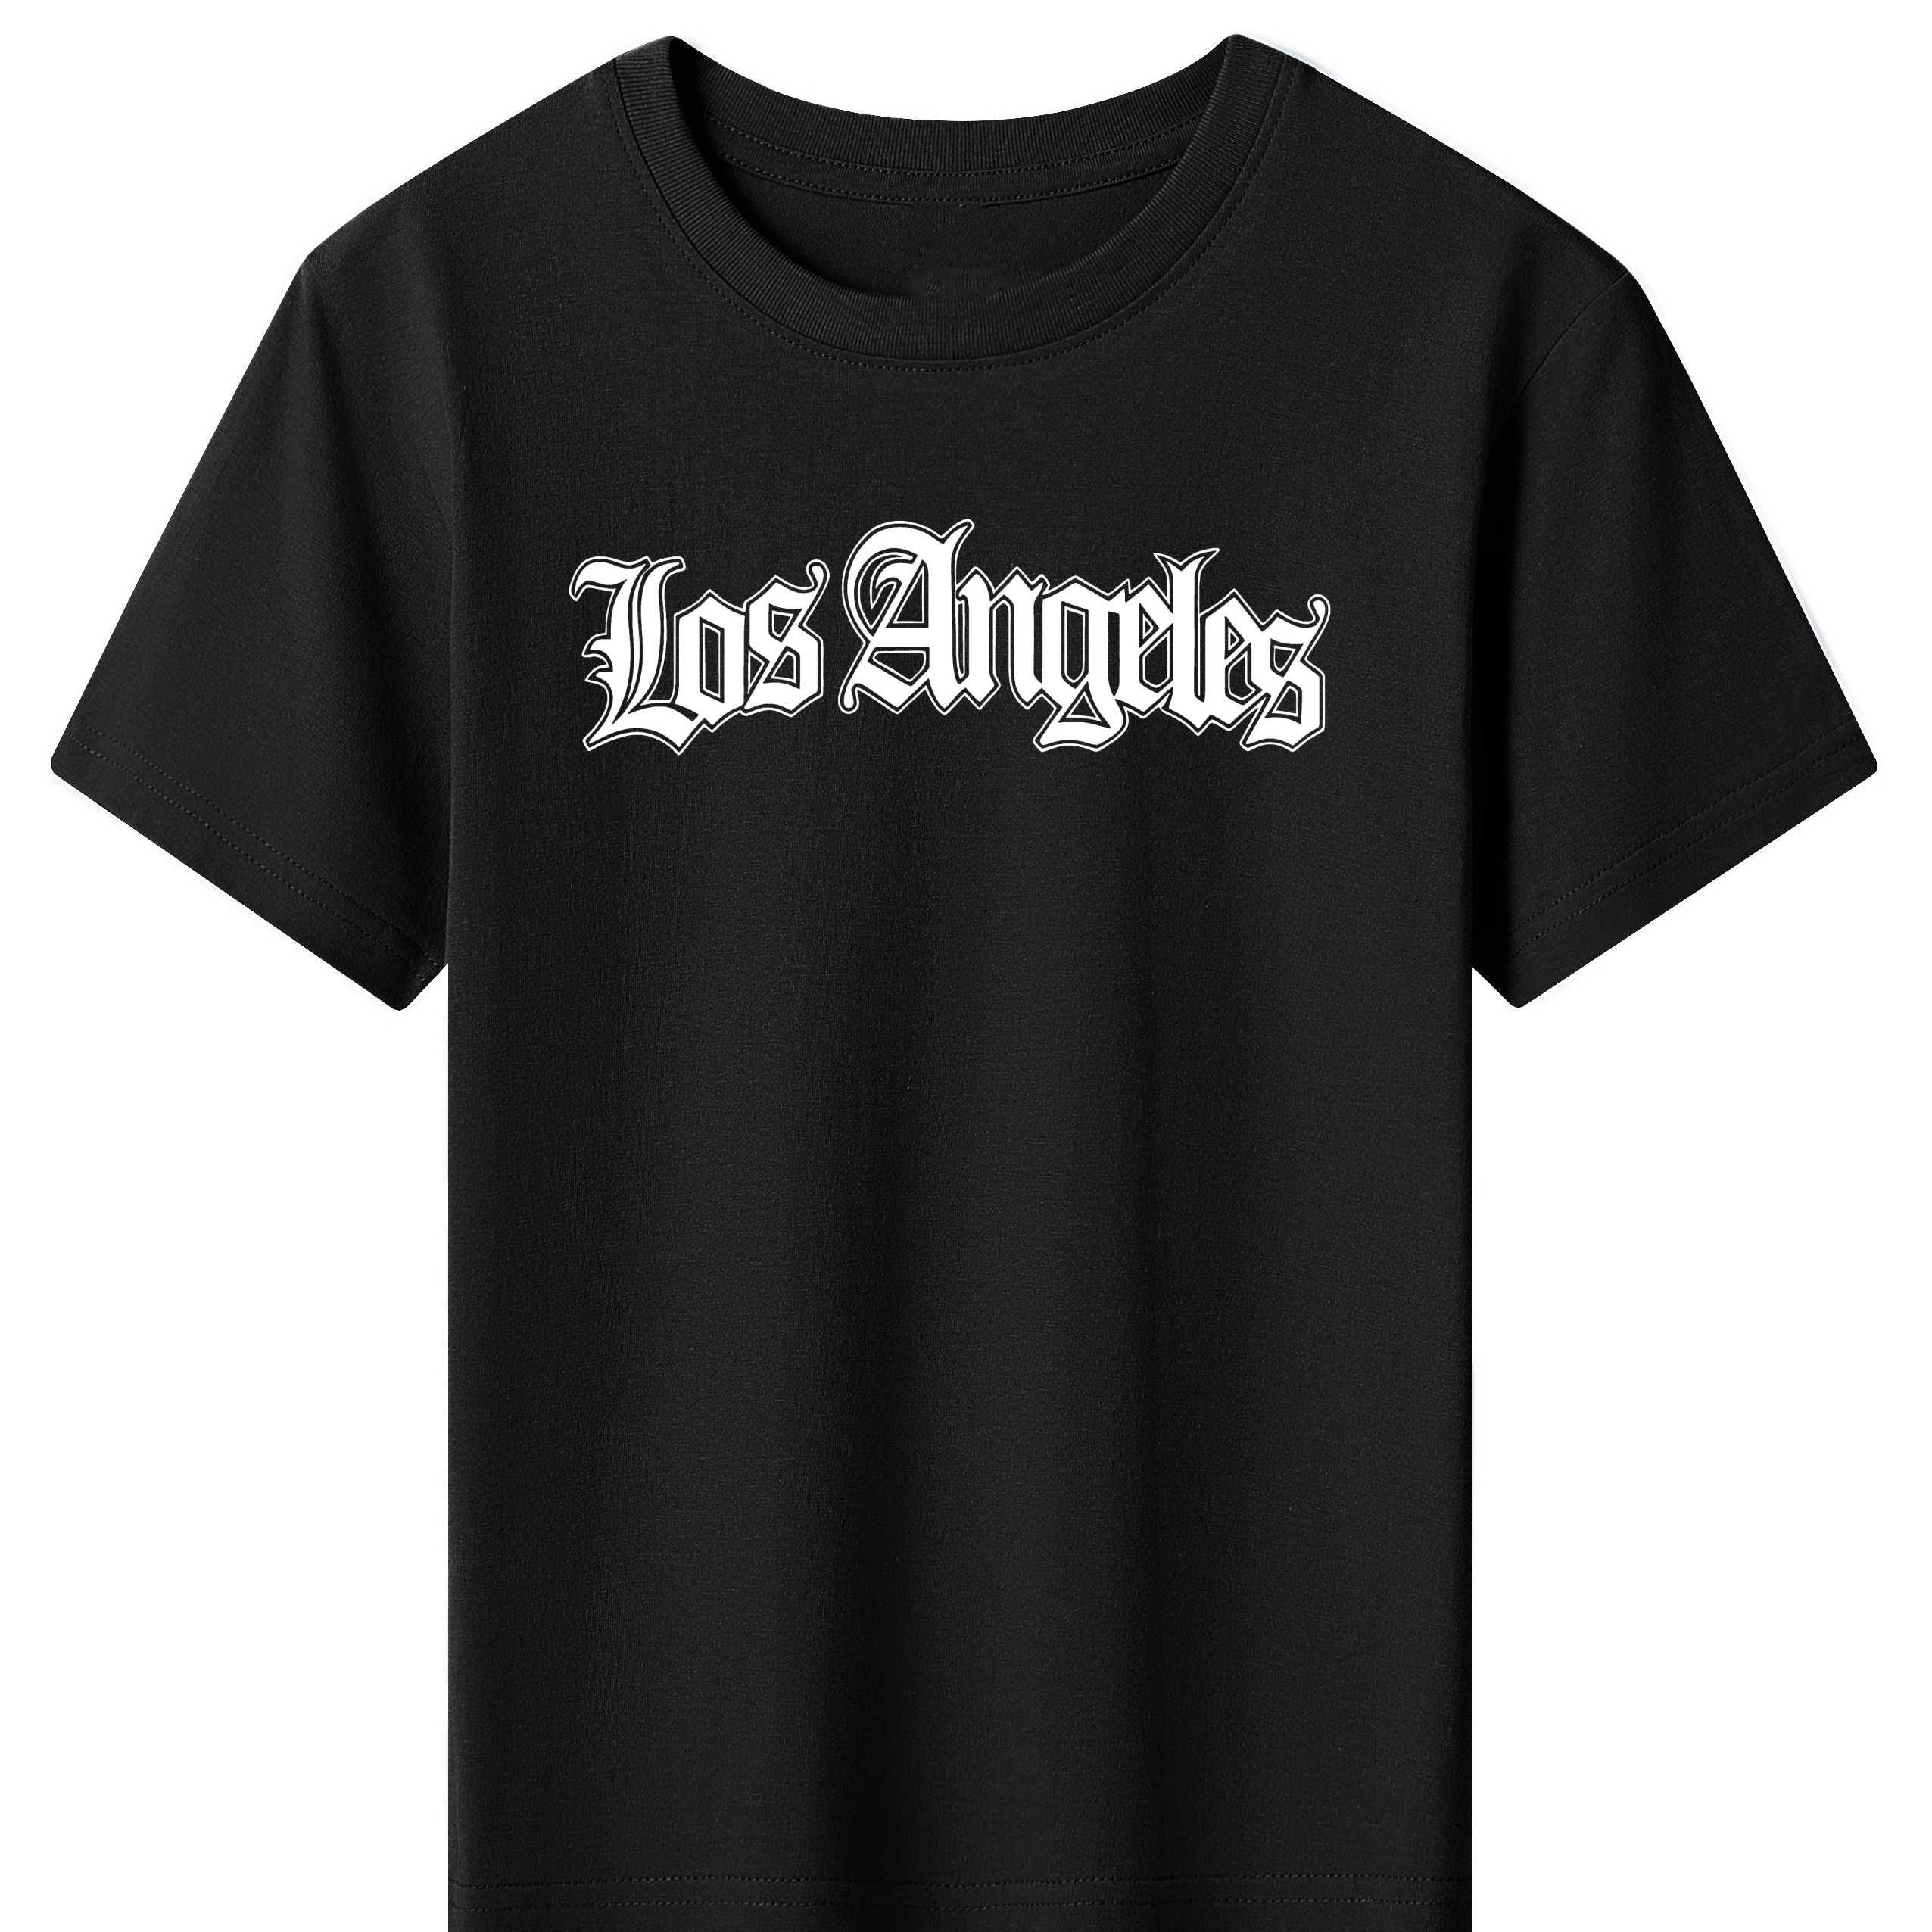 

Kids' Casual T-shirt, Los Angeles Print Tee, Comfortable Cotton Top For Boys, Casual Daily Wear